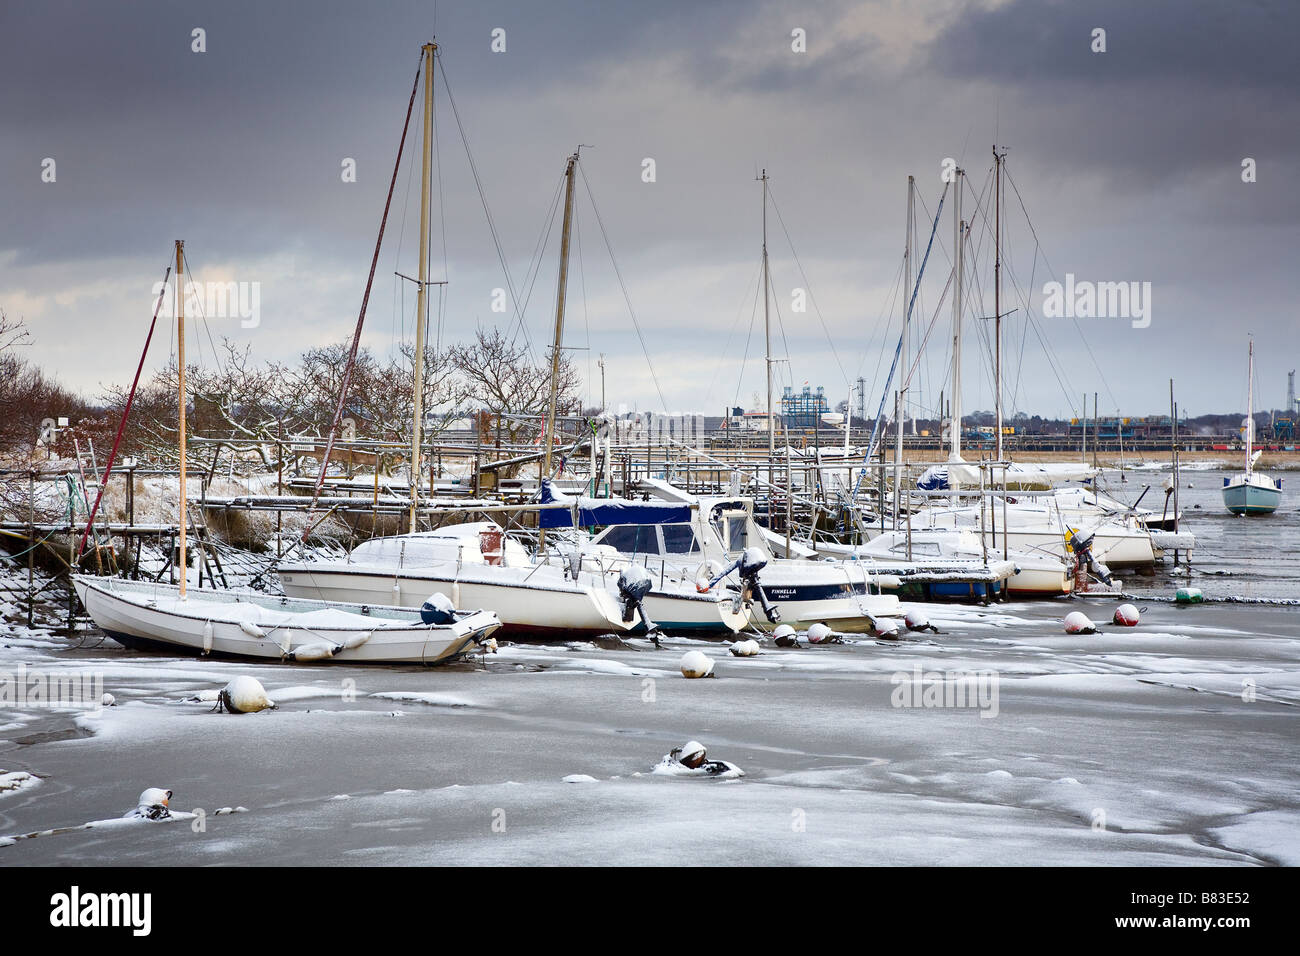 Snow covered boats aground on frozen mud Stock Photo